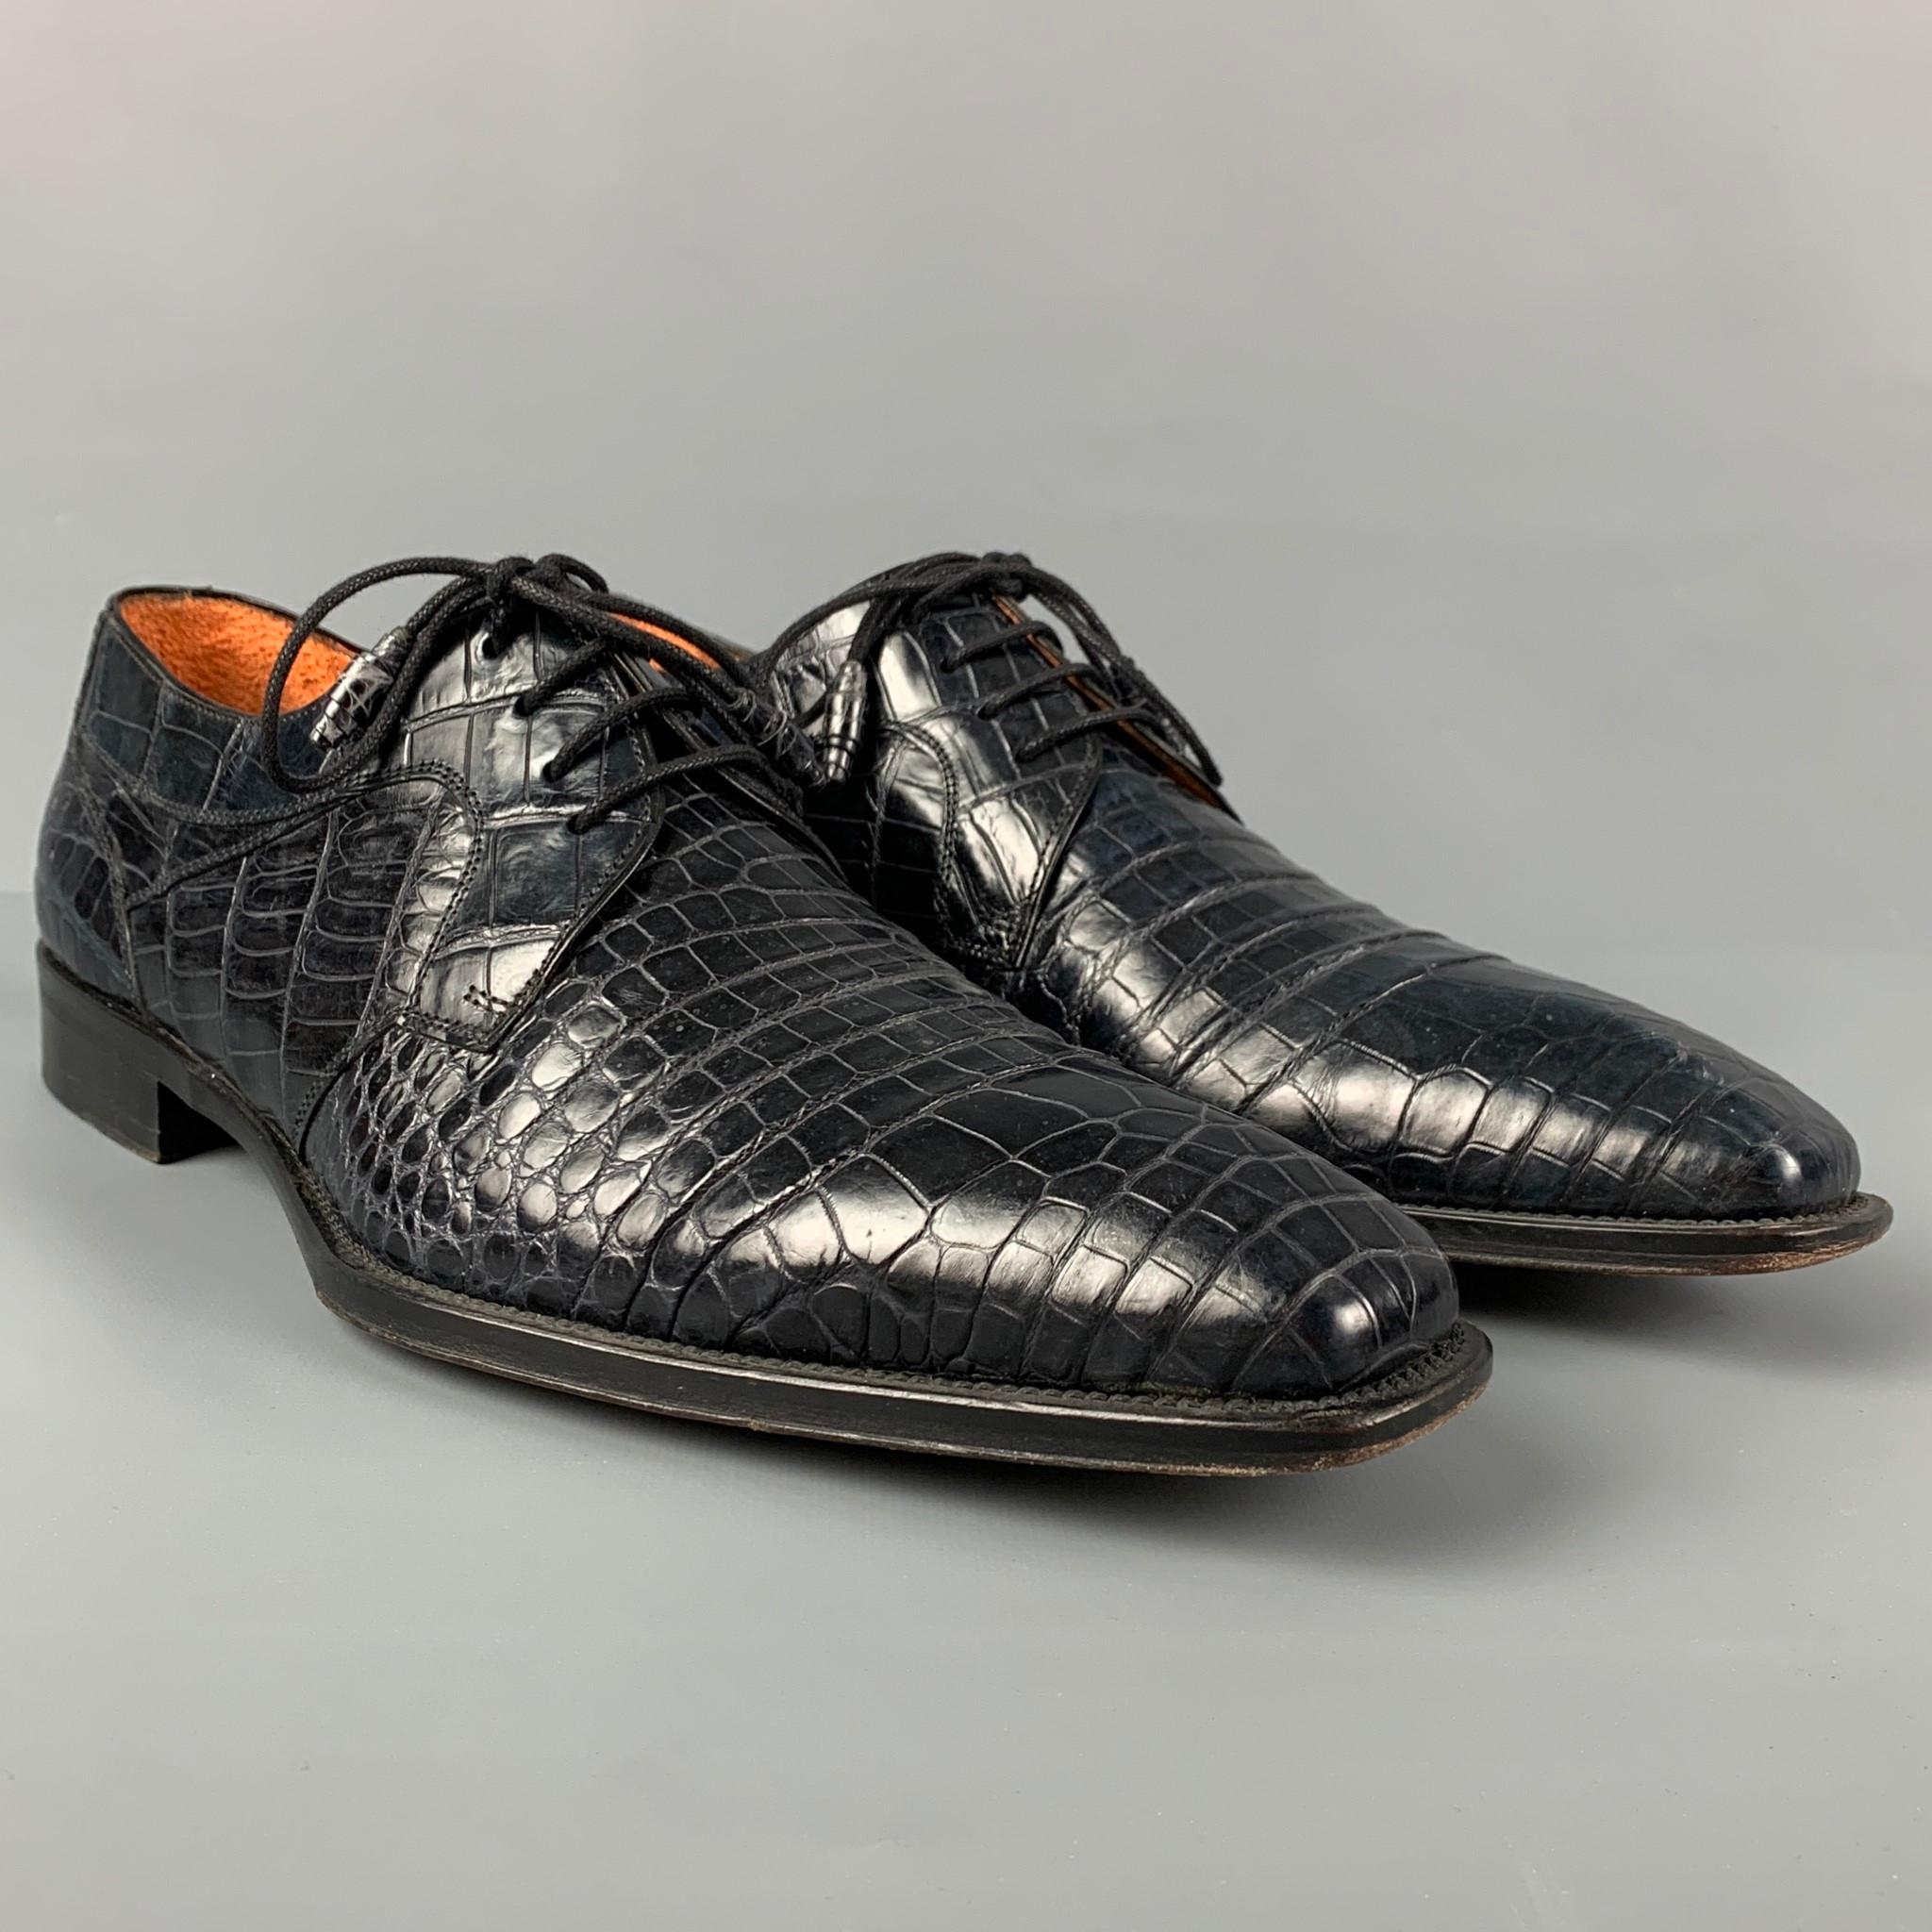 MEZLAN shoes comes in a blue textured alligator leather featuring a square toe and a lace up closure. Made in Spain. 

Very Good Pre-Owned Condition.
Marked: 9.5 M
Original Retail Price: $1,495.00

Outsole: 12.5 in. x 4.5 in. 